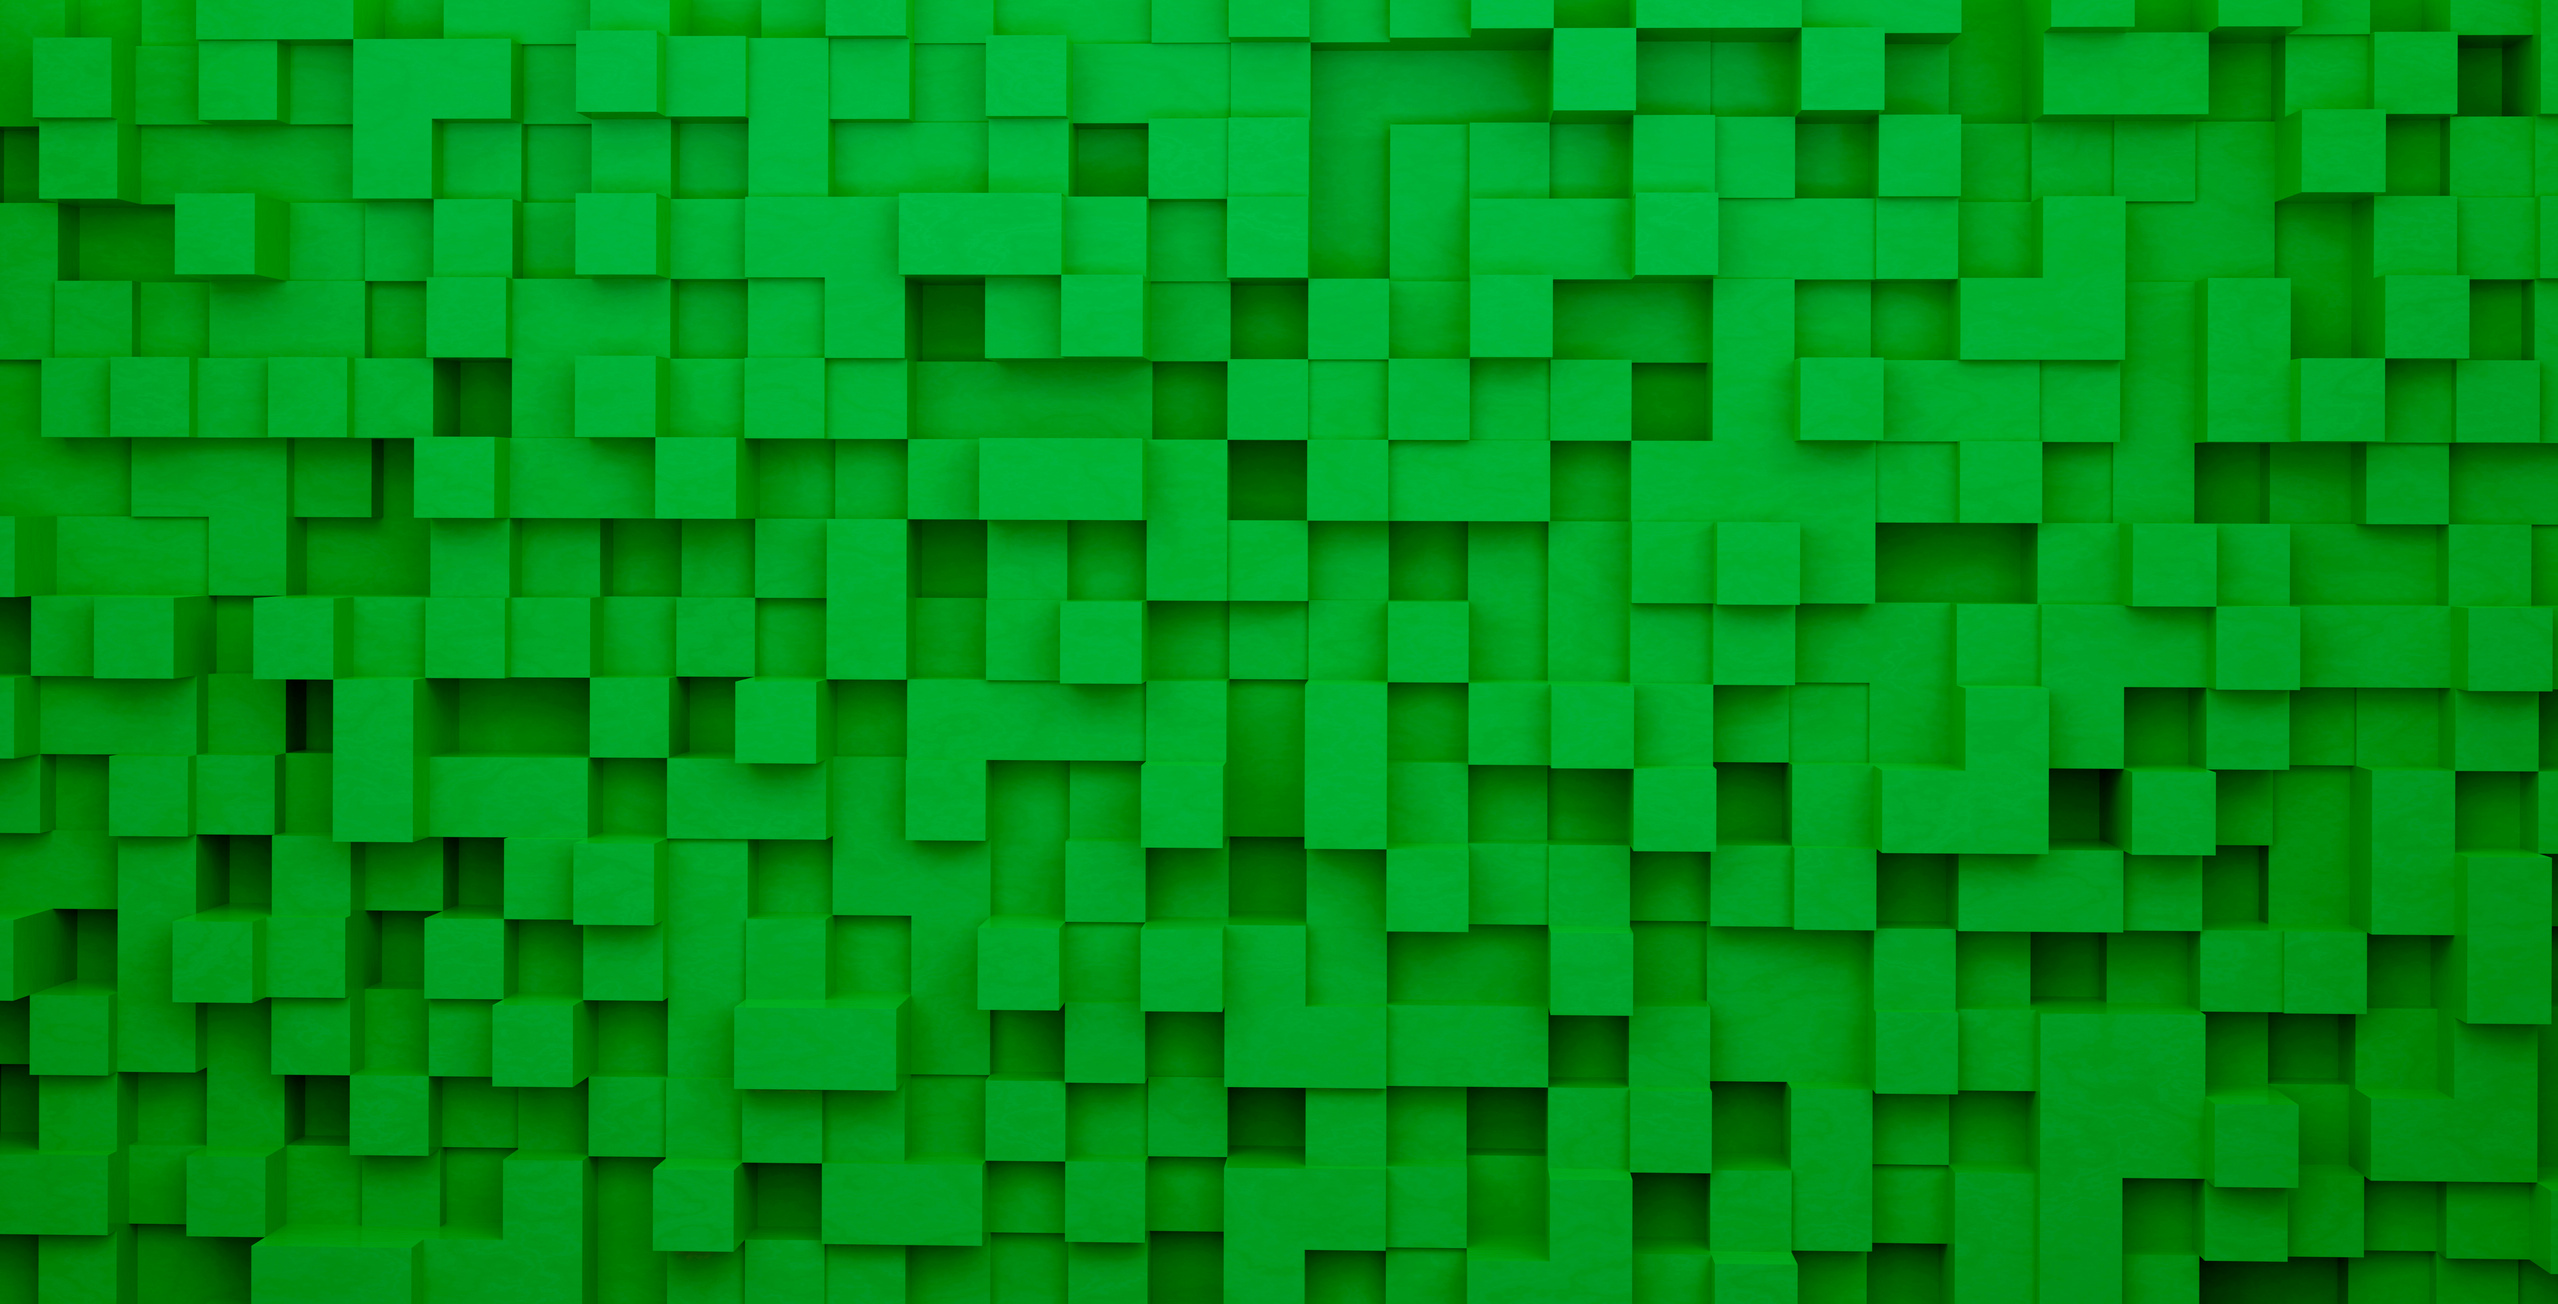 Abstract 3d square pixels template green colors. The concept of